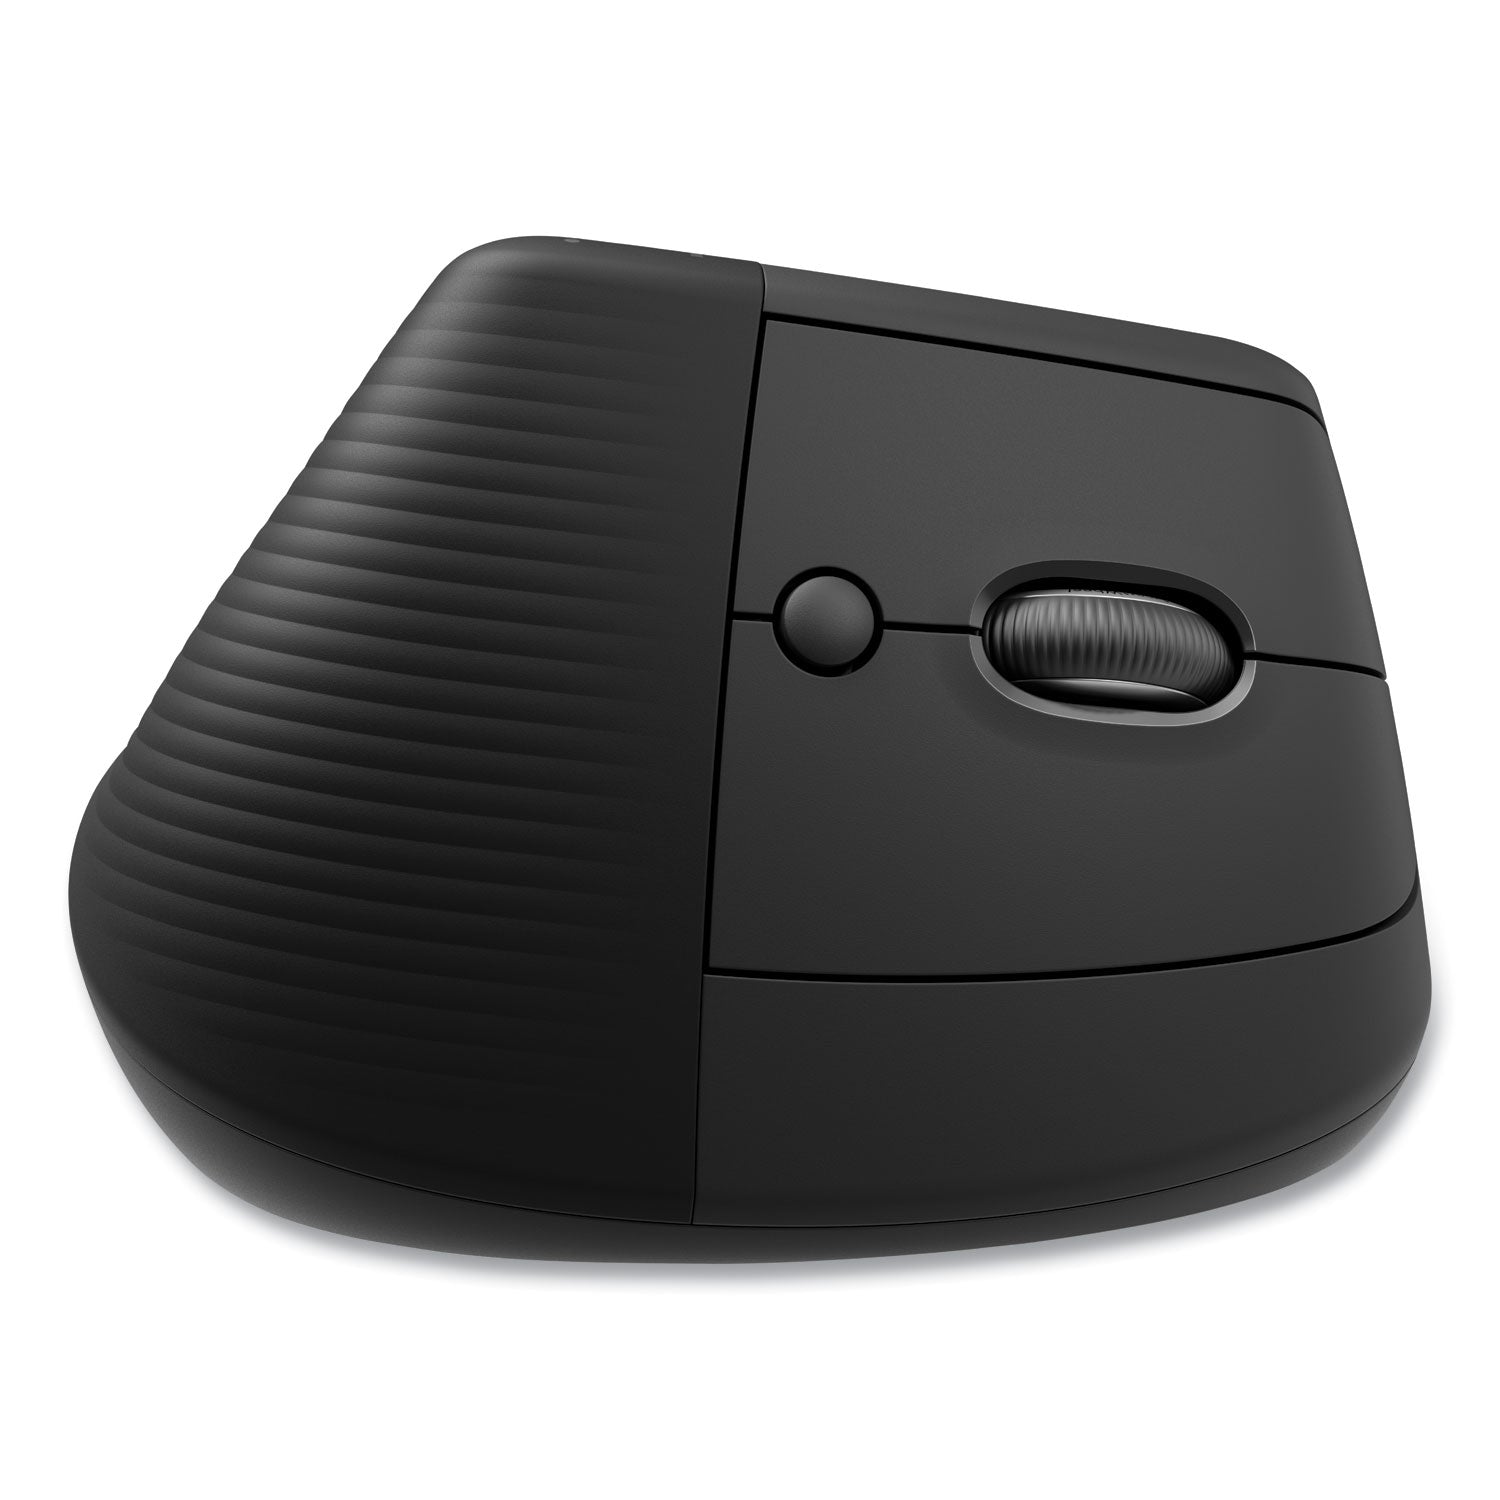 lift-for-business-vertical-ergonomic-mouse-24-ghz-frequency-32-ft-wireless-range-right-hand-use-graphite_log910006491 - 8